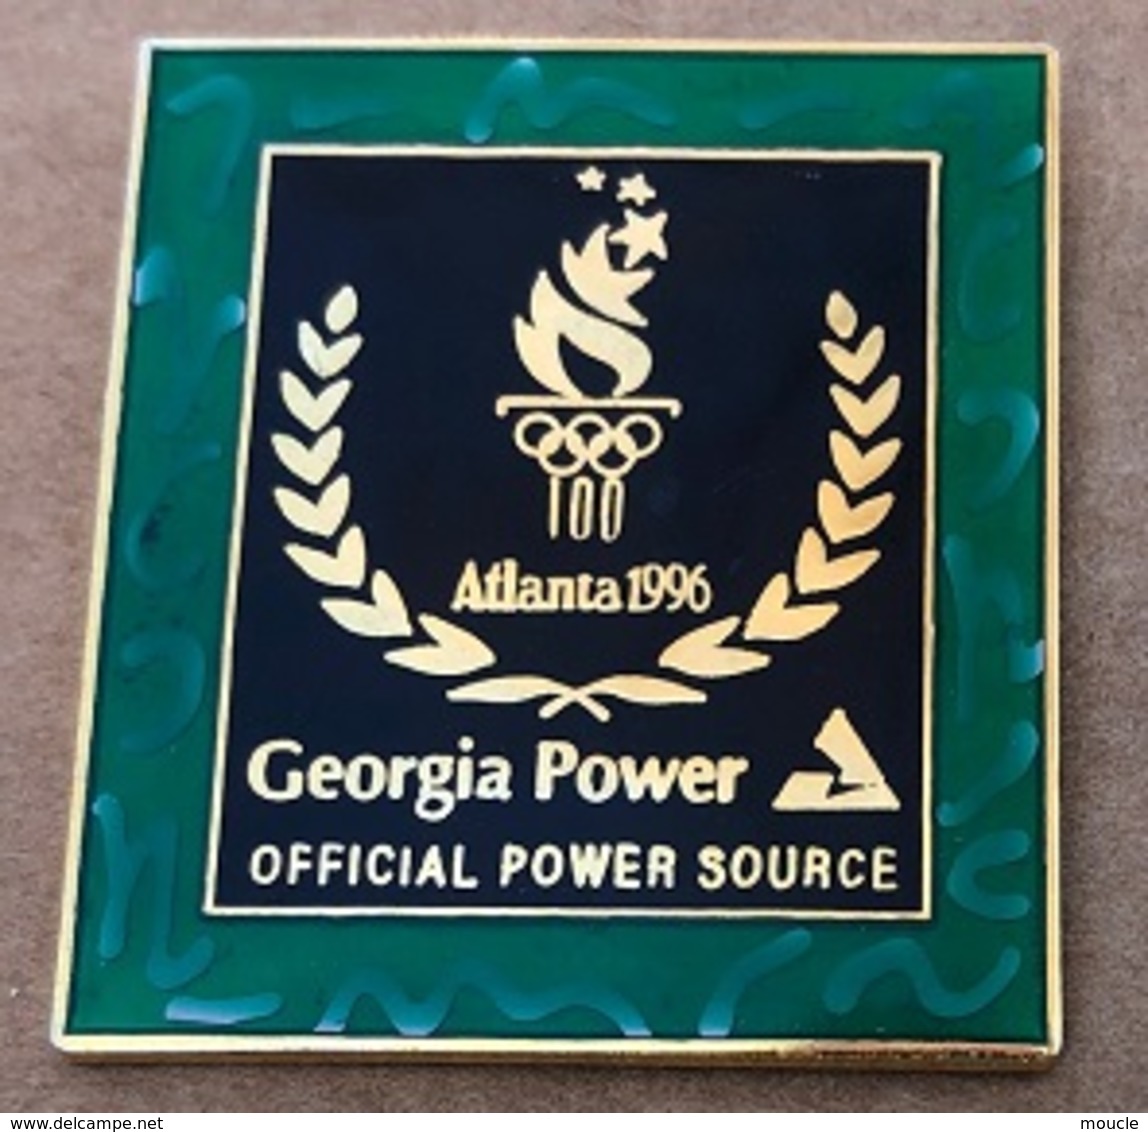 JEUX OLYMPIQUES - OLYMPIC GAMES ATLANTA 1996 - 100th - 100ème - GEORGIA POWER . OFFICIAL POWER SOURCE - LAURIERS - (24) - Olympische Spiele